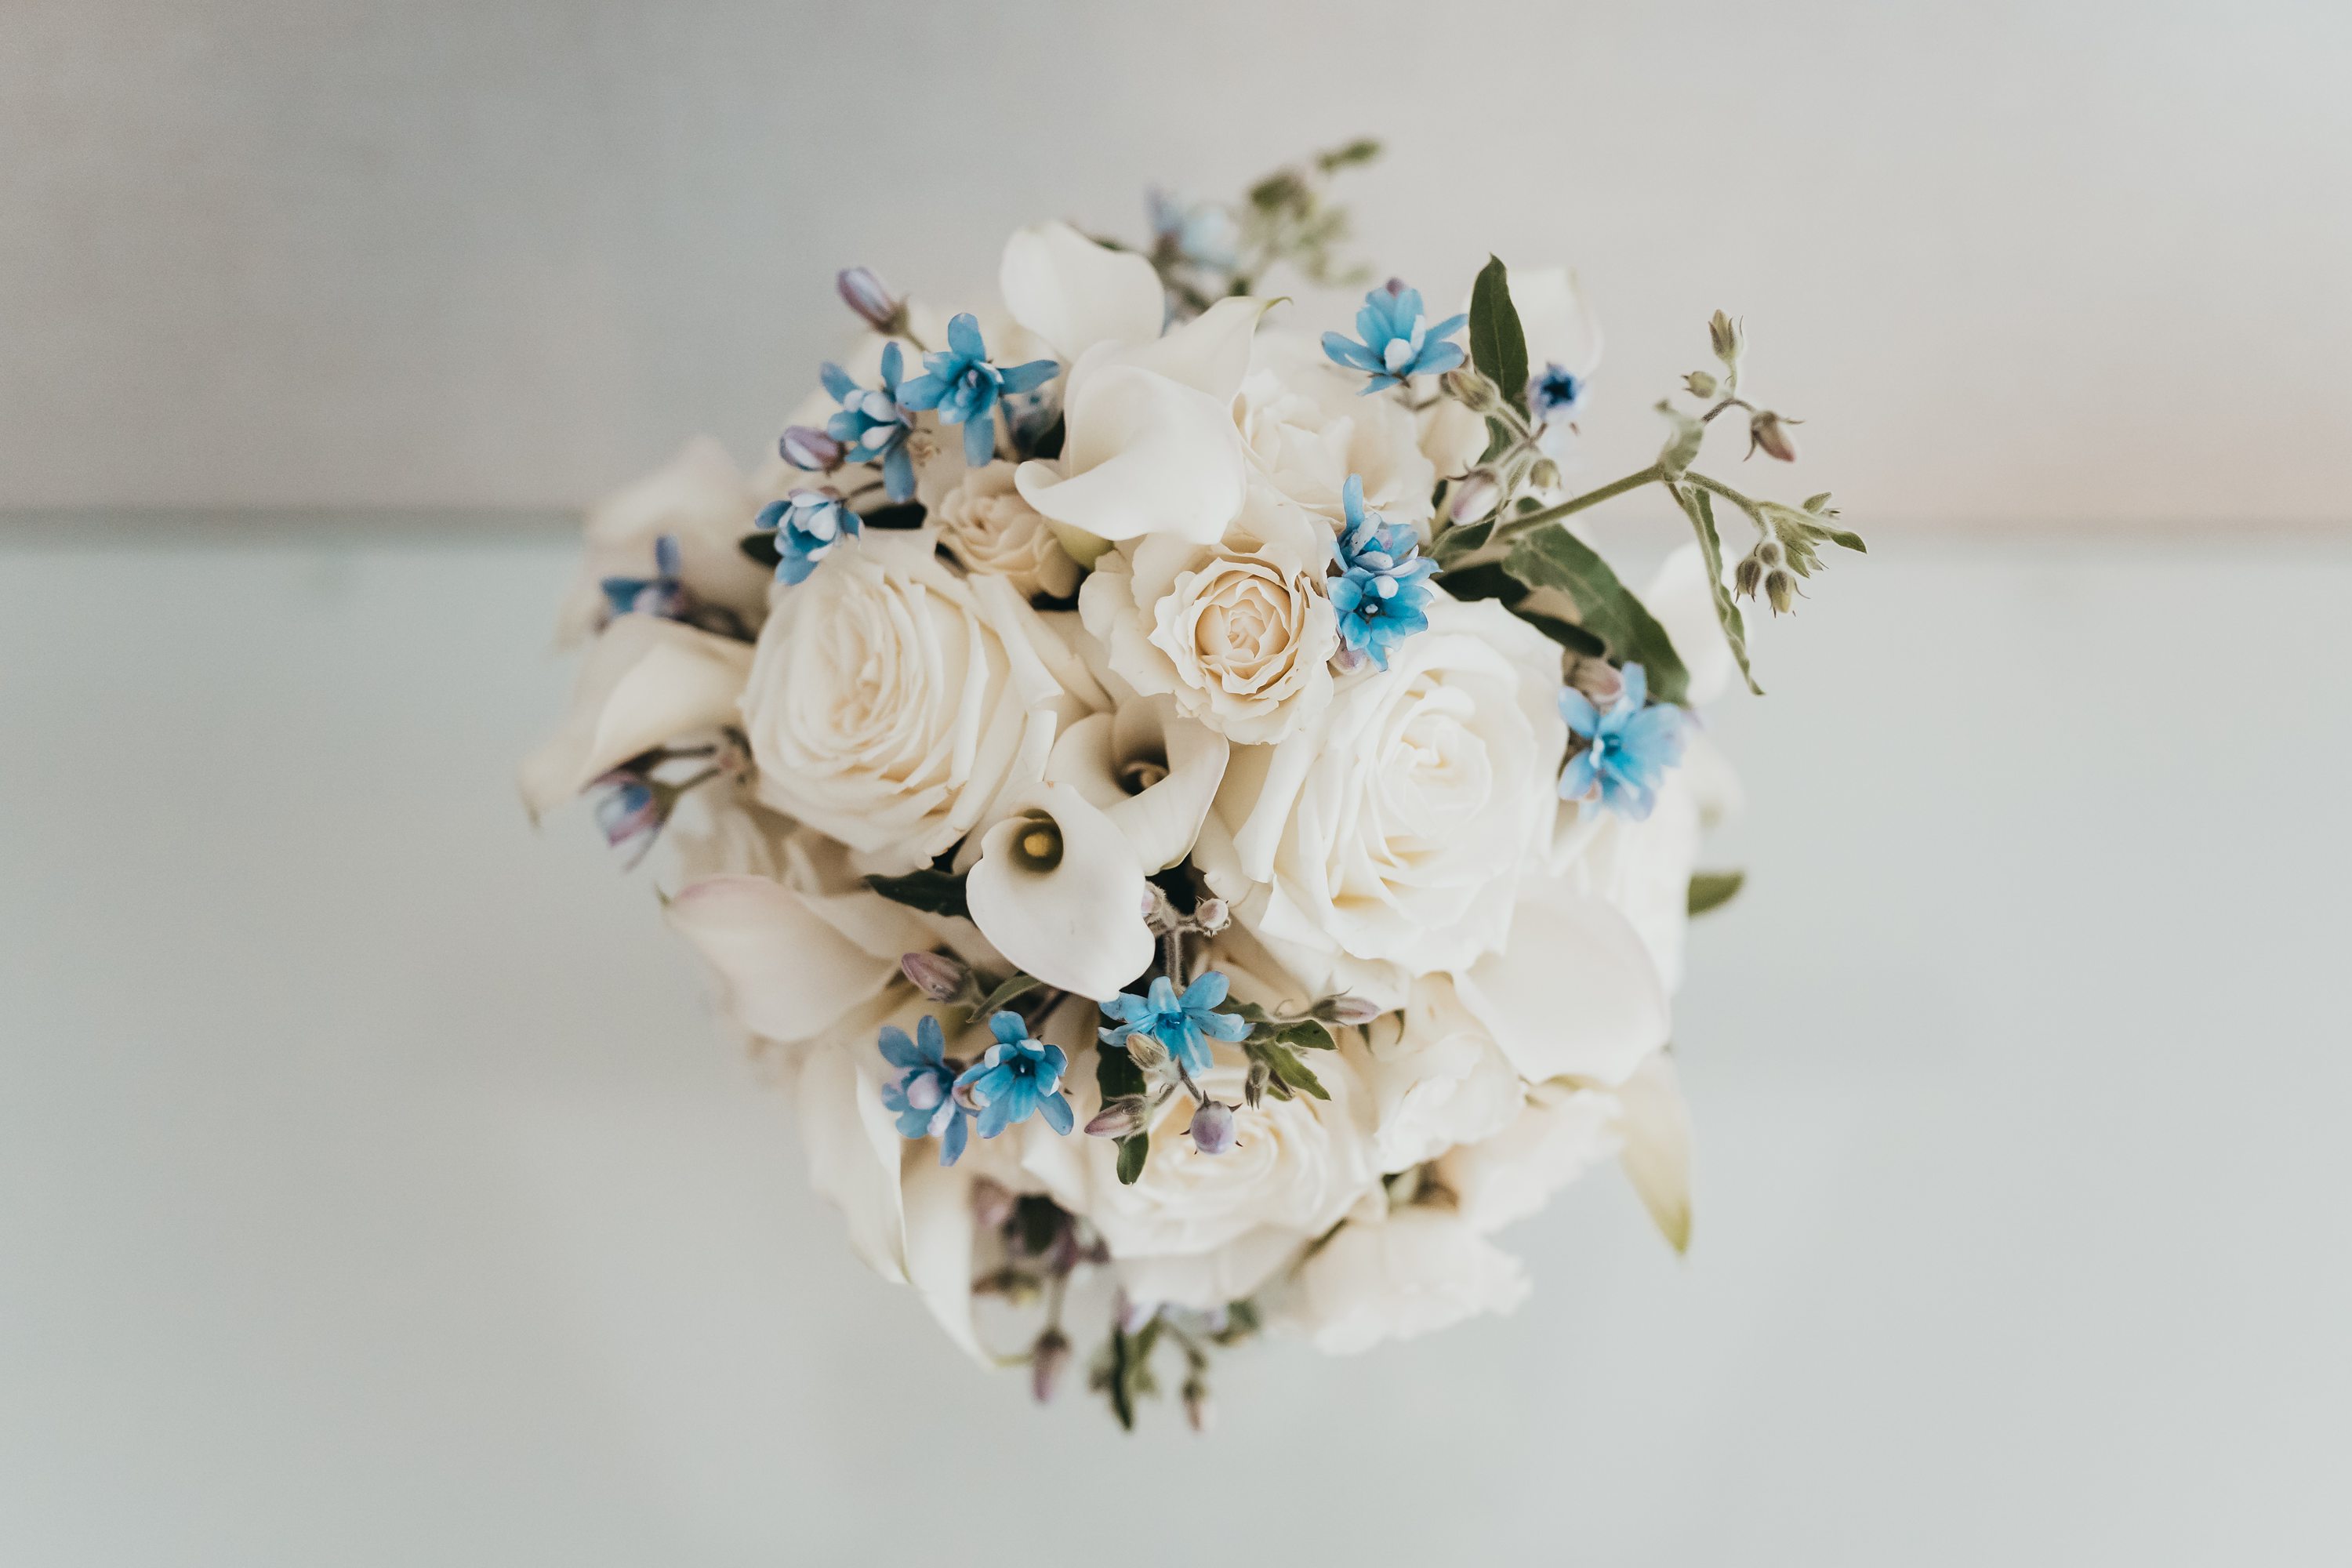 Worcester Wedding Photographer,2020 covid wedding,white roses and blue accent flowers,artistic blossoms boston